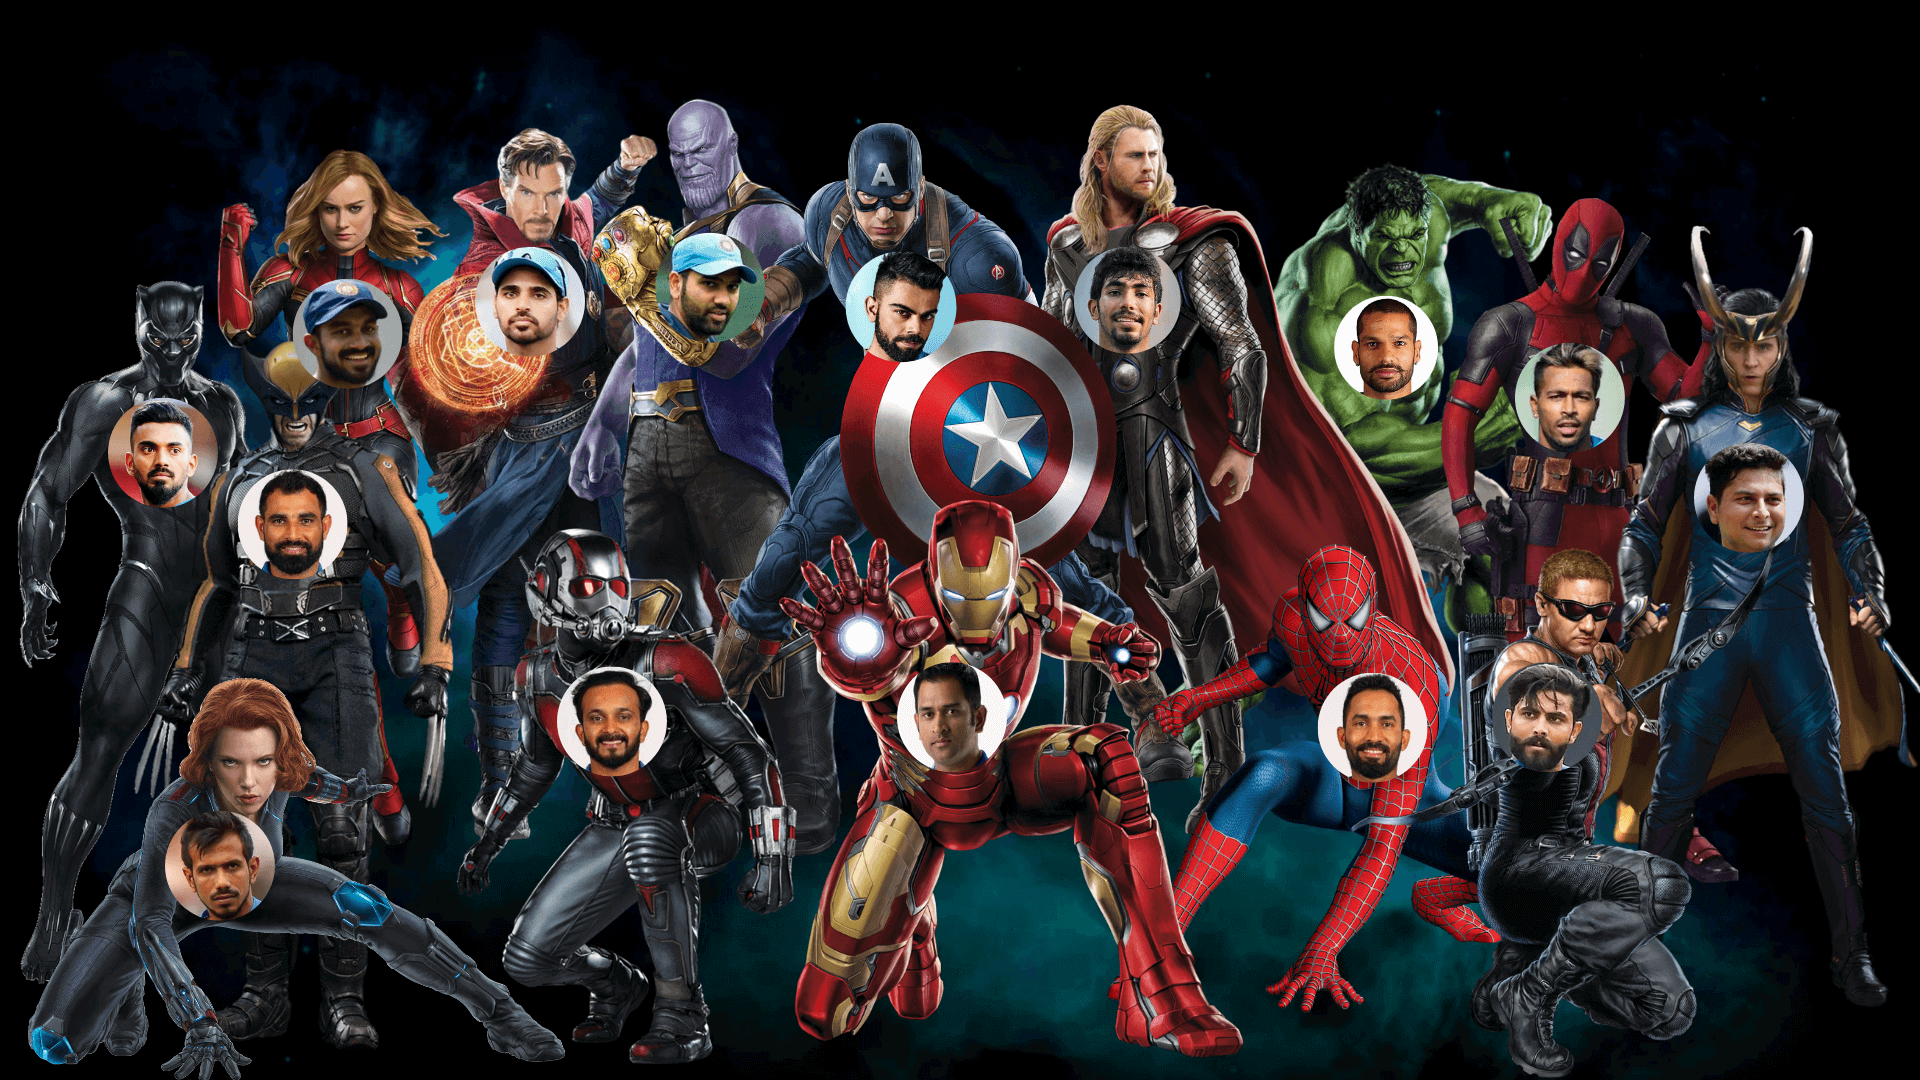 Indian Cricket World Cup Team As Real Life Marvel Superheroes - Marvel Super Heroes Real - HD Wallpaper 